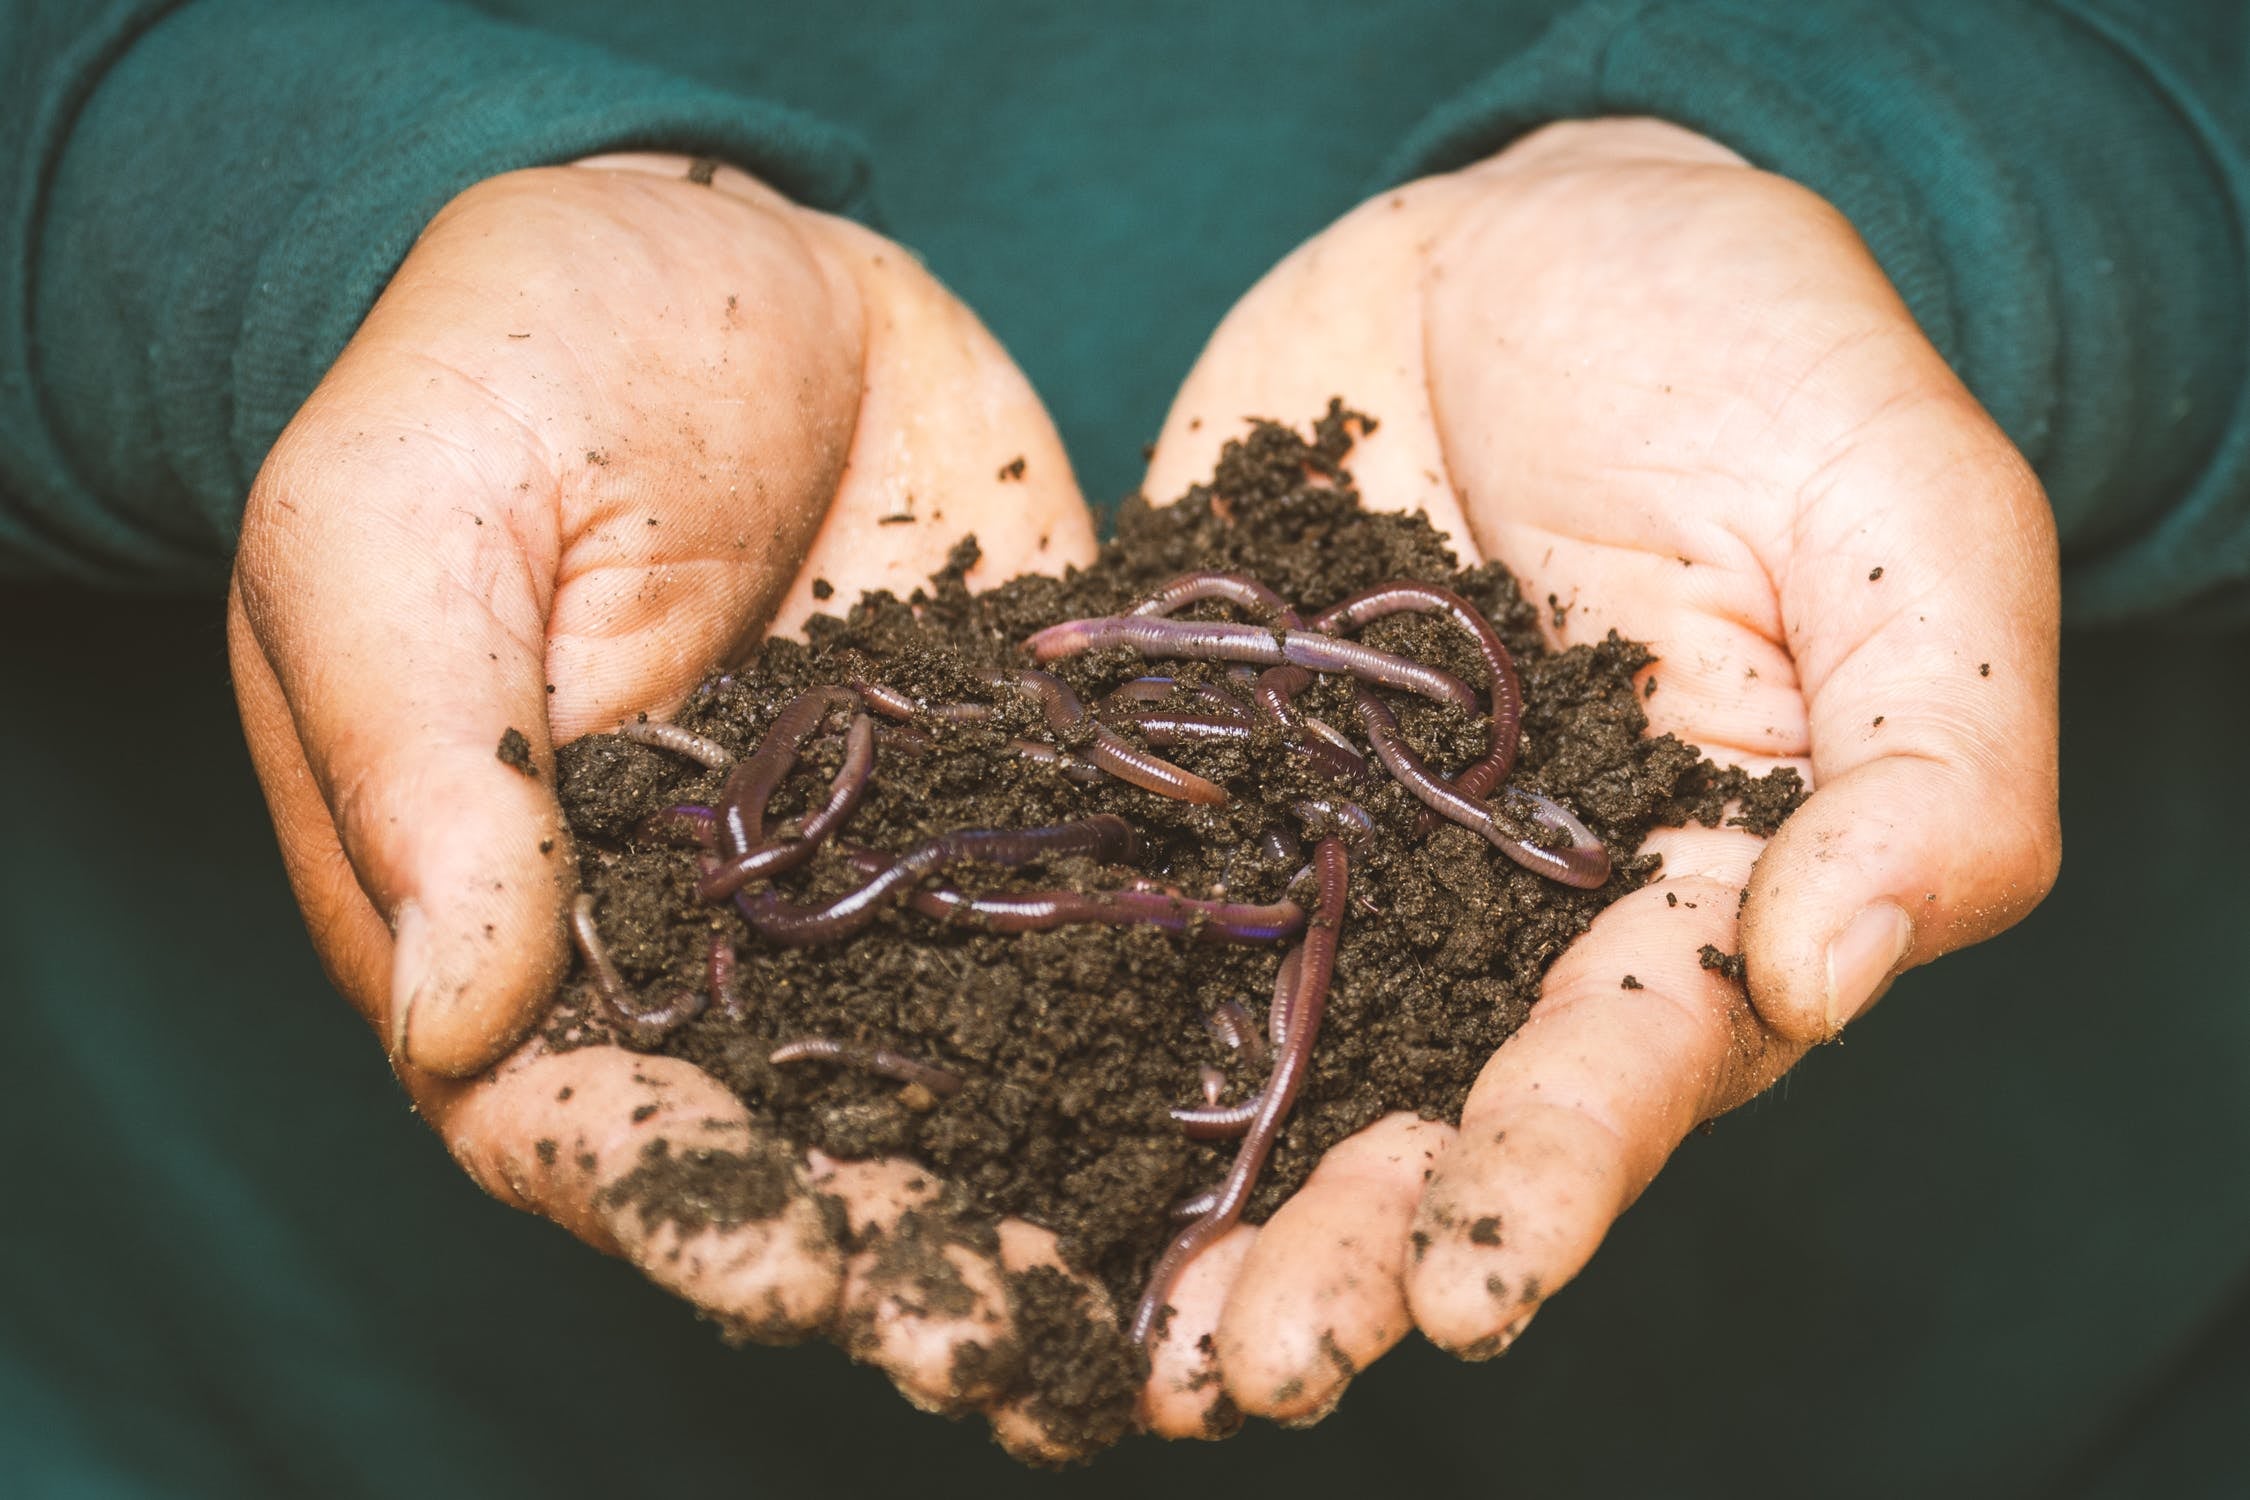 Hand holding worms in dirt